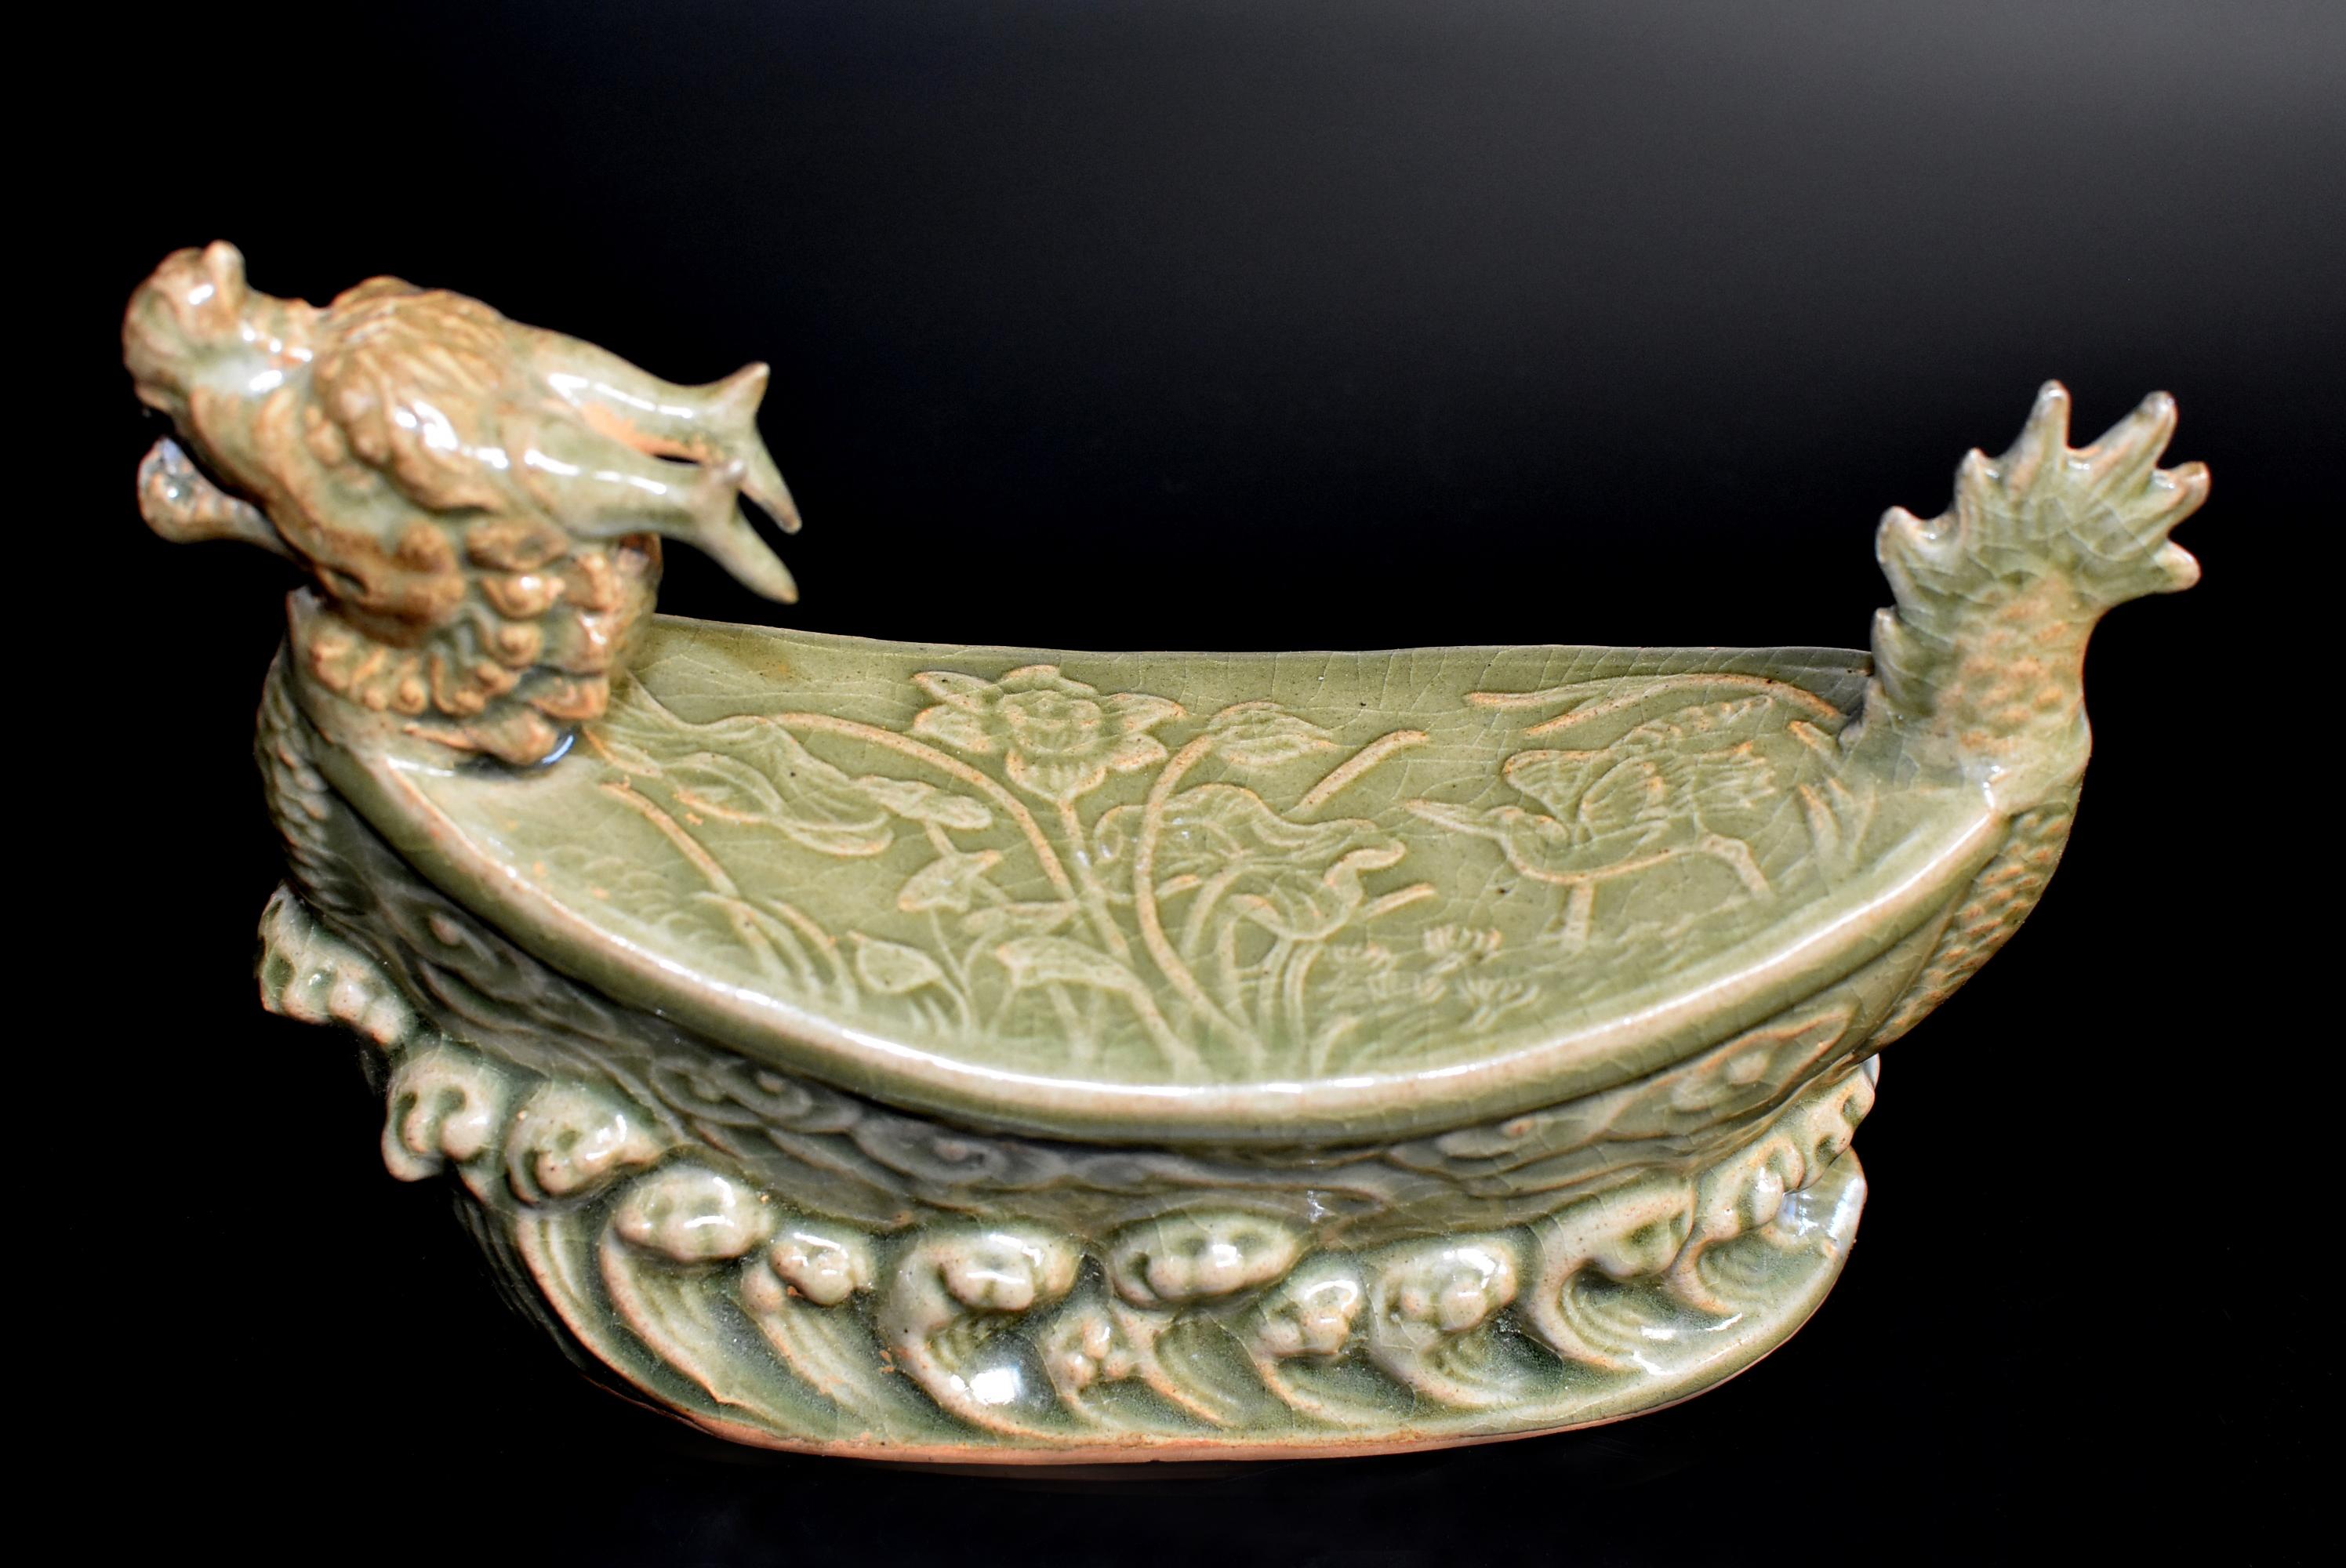 A song dynasty style porcelain pillow of the Long Quan kiln. The long Quan kiln is one of the most important song dynasty kilns. Started 1600 years ago, it produces celadon green and lotus leaf green glazed pieces with subtle under-glaze engraving.